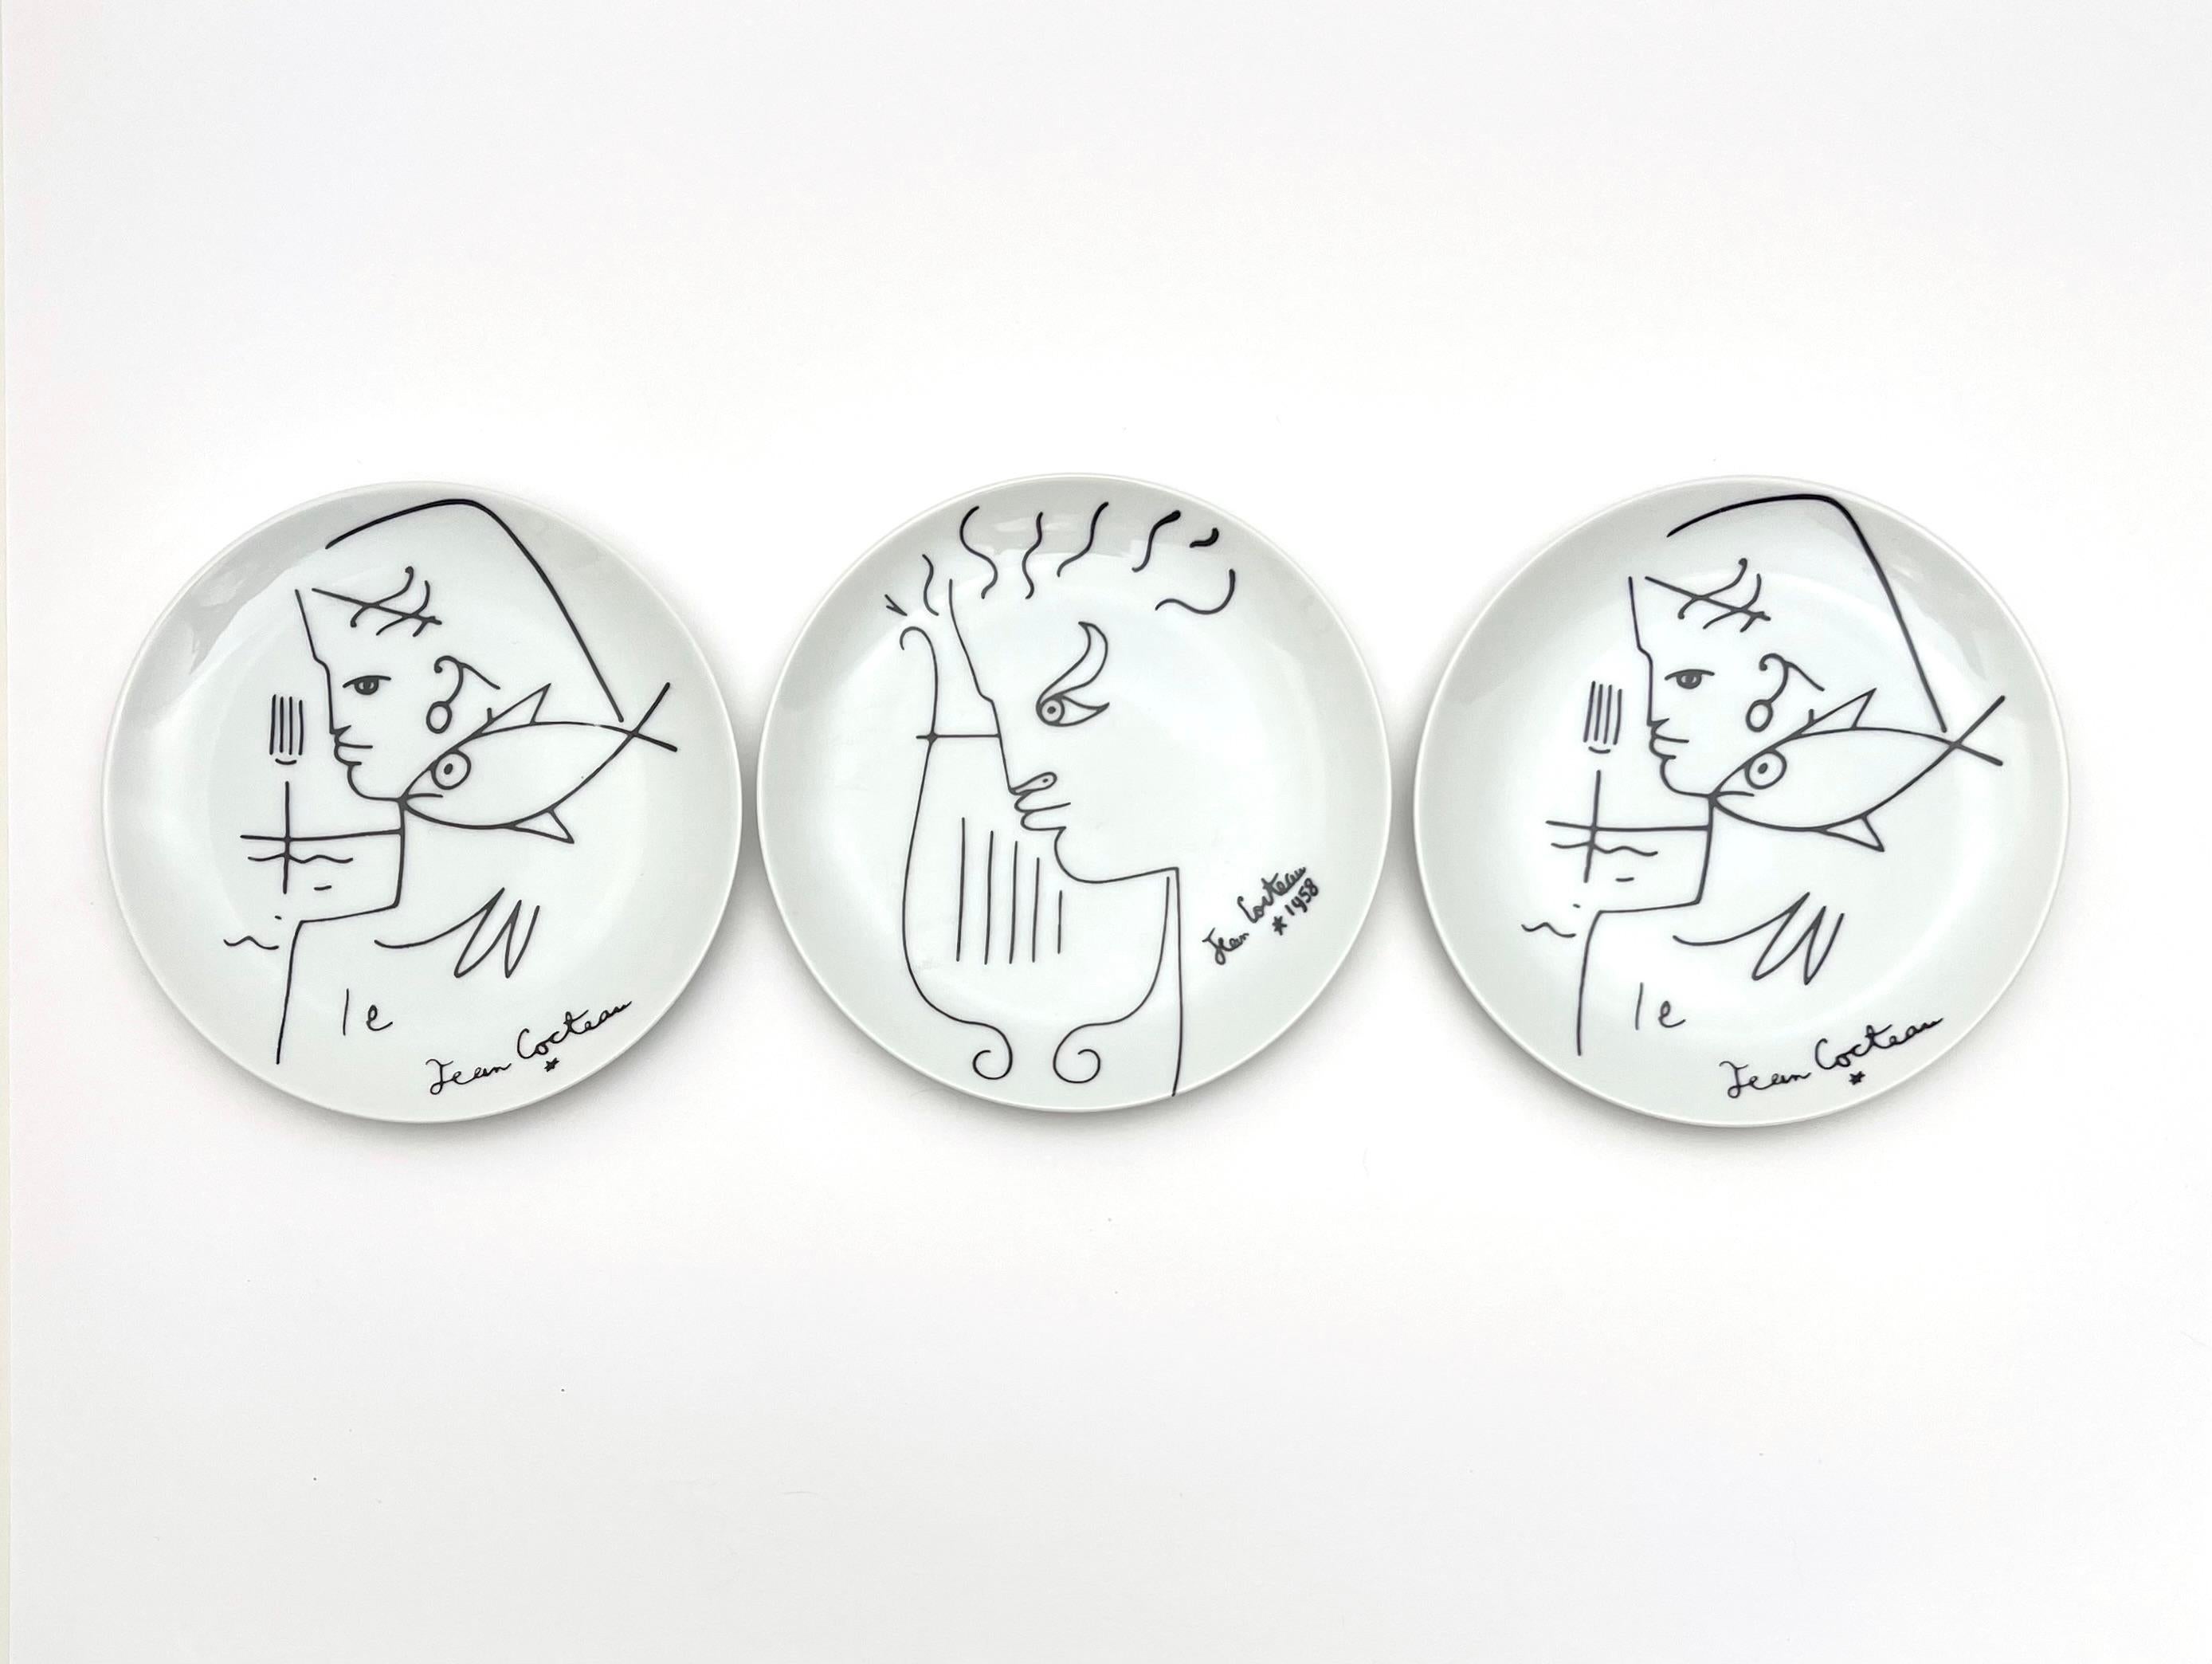 Fabulous set of 8 Jean Cocteau porcelain hor d'oeuvres or dessert plates for Limoges.  Four unique figural  drawings of ancient Greece from Orpheus and his harp to Eurydice.  One signed 1958 the year he created the drawings.
The set is three of one